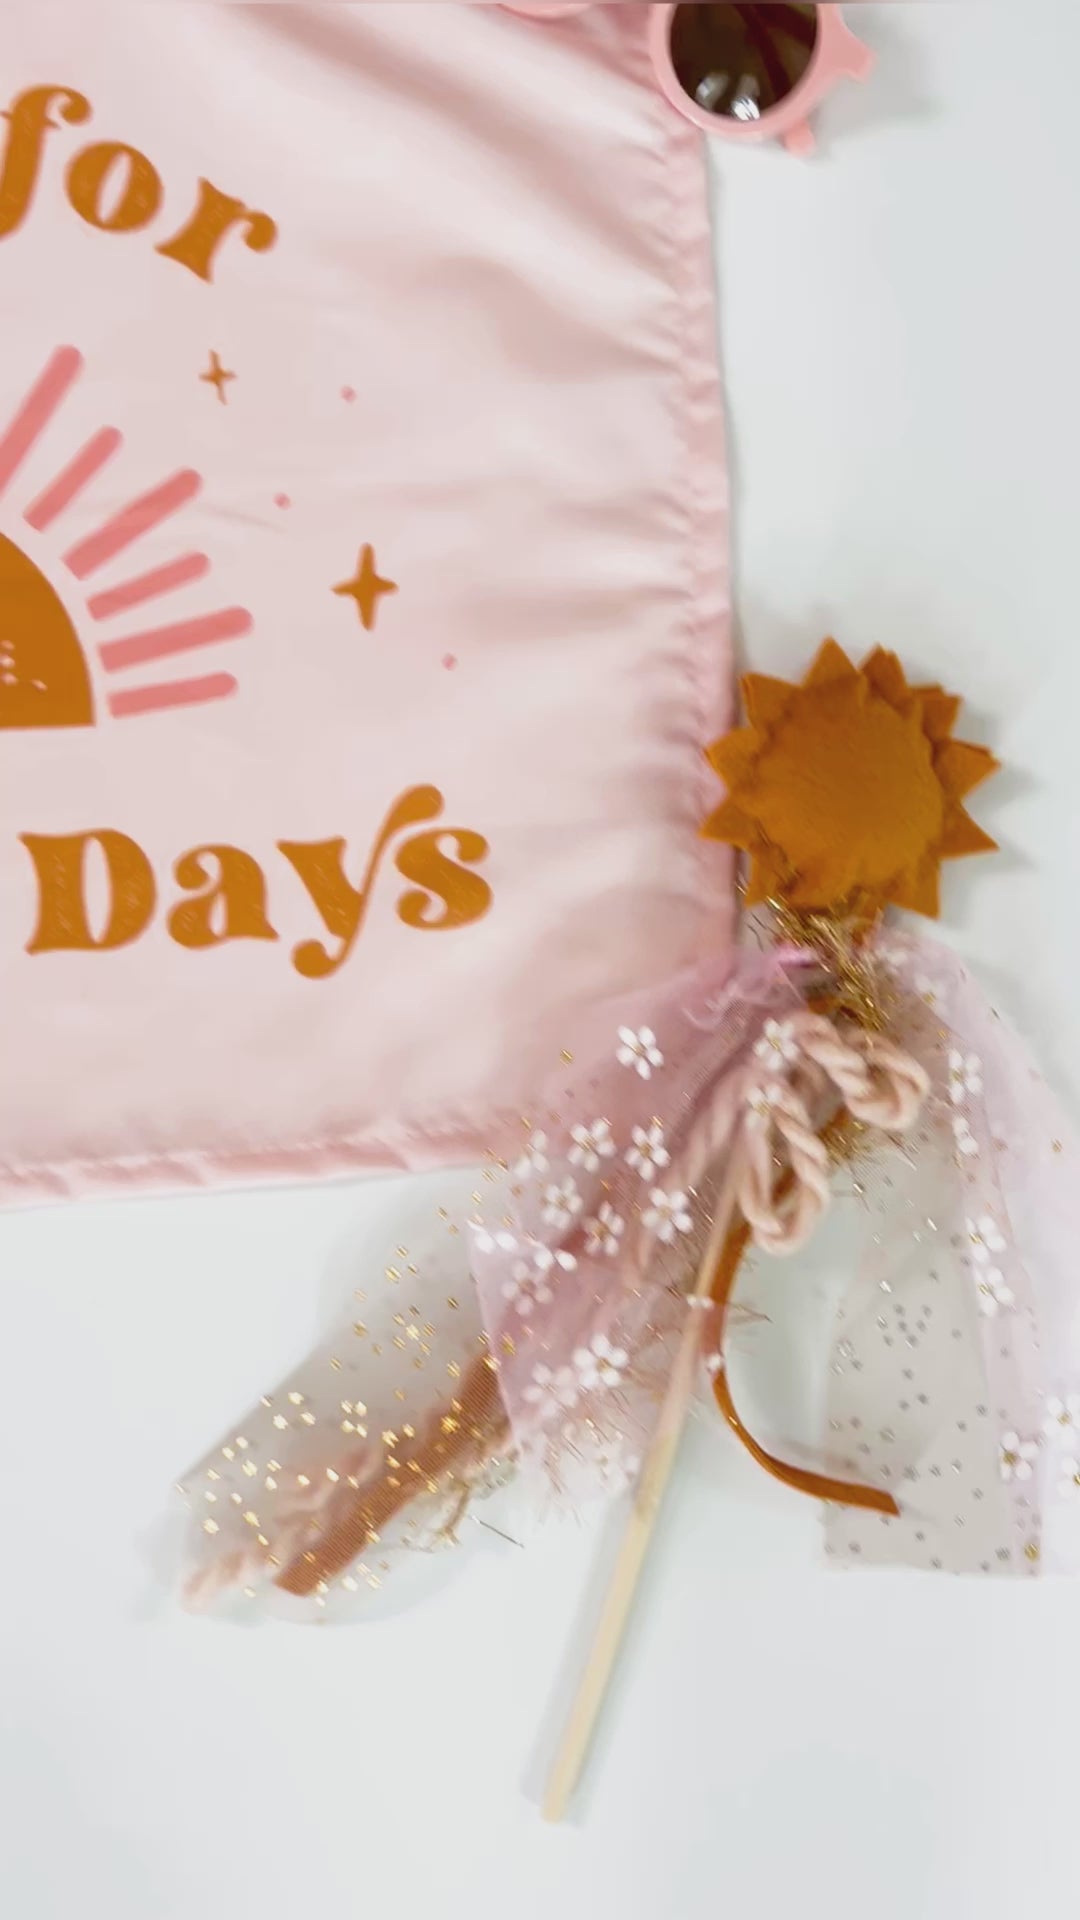 {Pink} Made For Sunny Days Banner